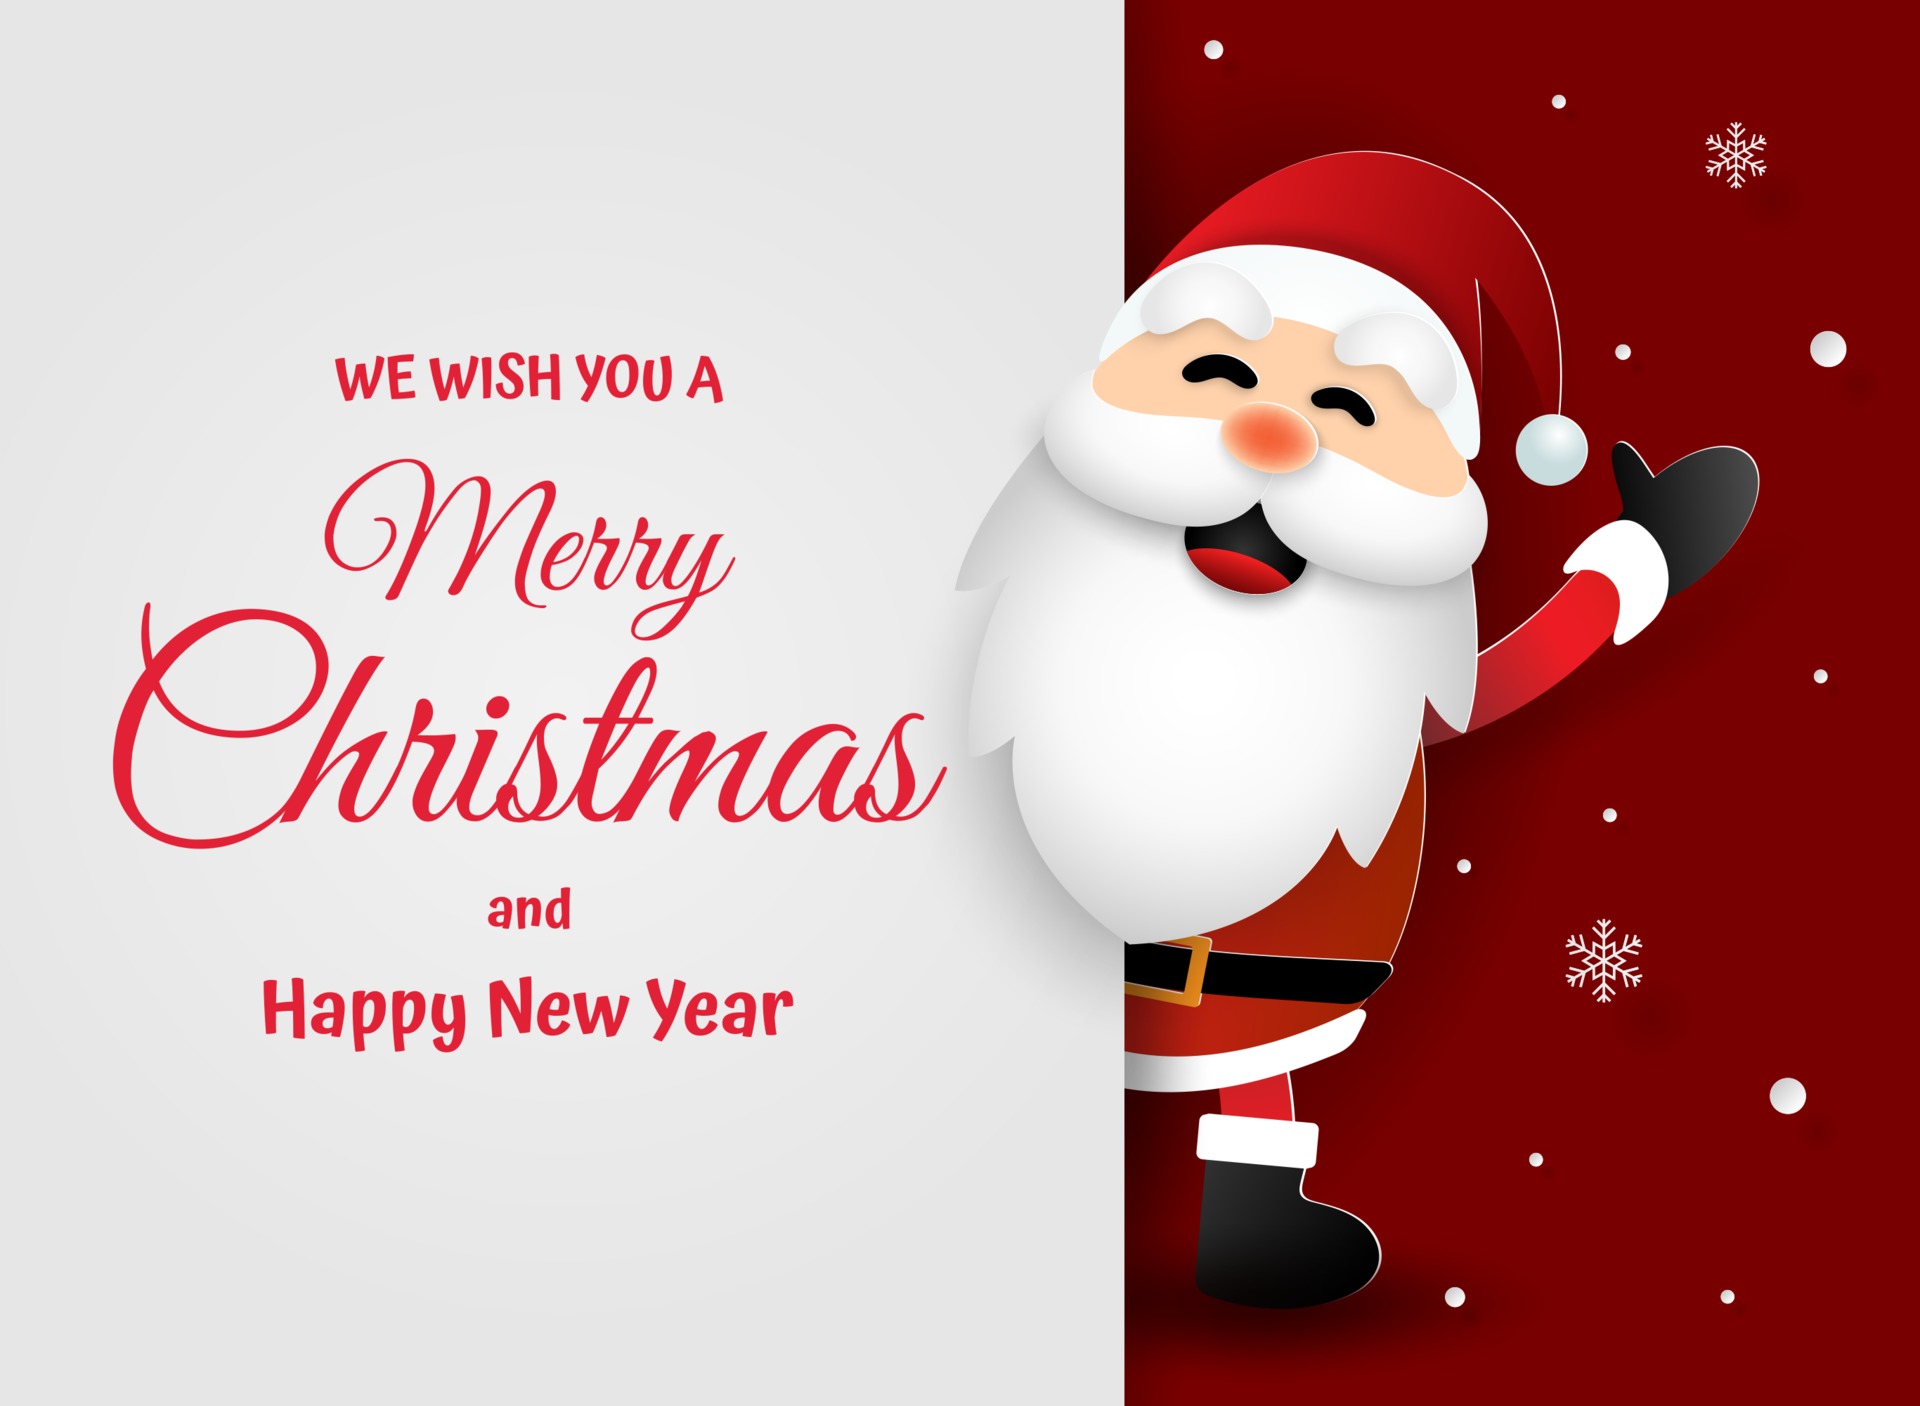 Christmas Card With Santa Claus Merry Christmas And Happy New Year